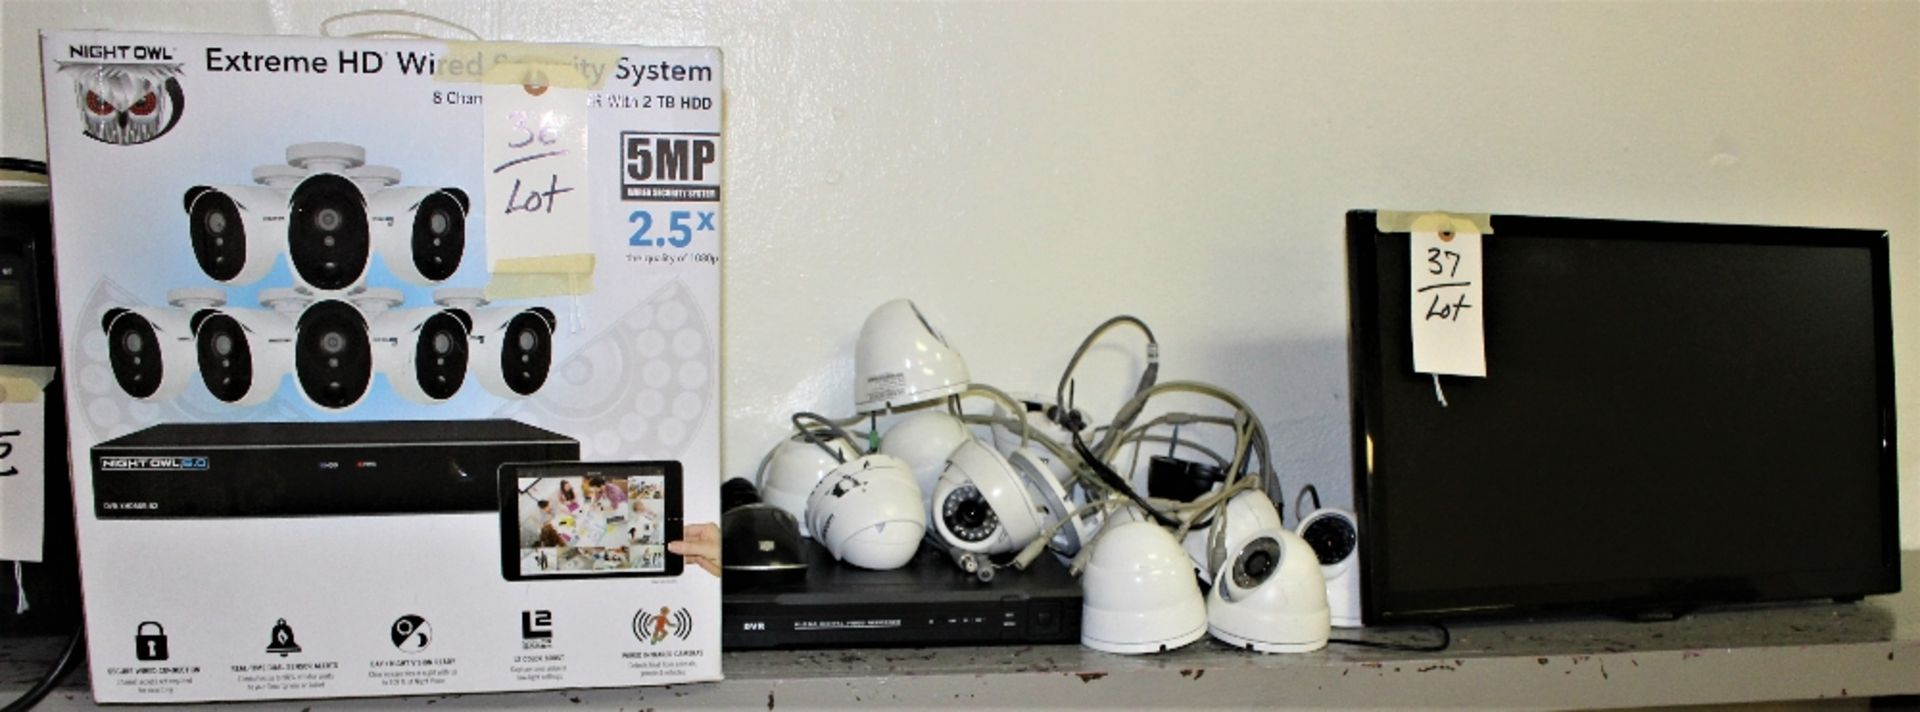 NEW NIGHT OWL 8 CHANNEL SECURITY SYSTEM